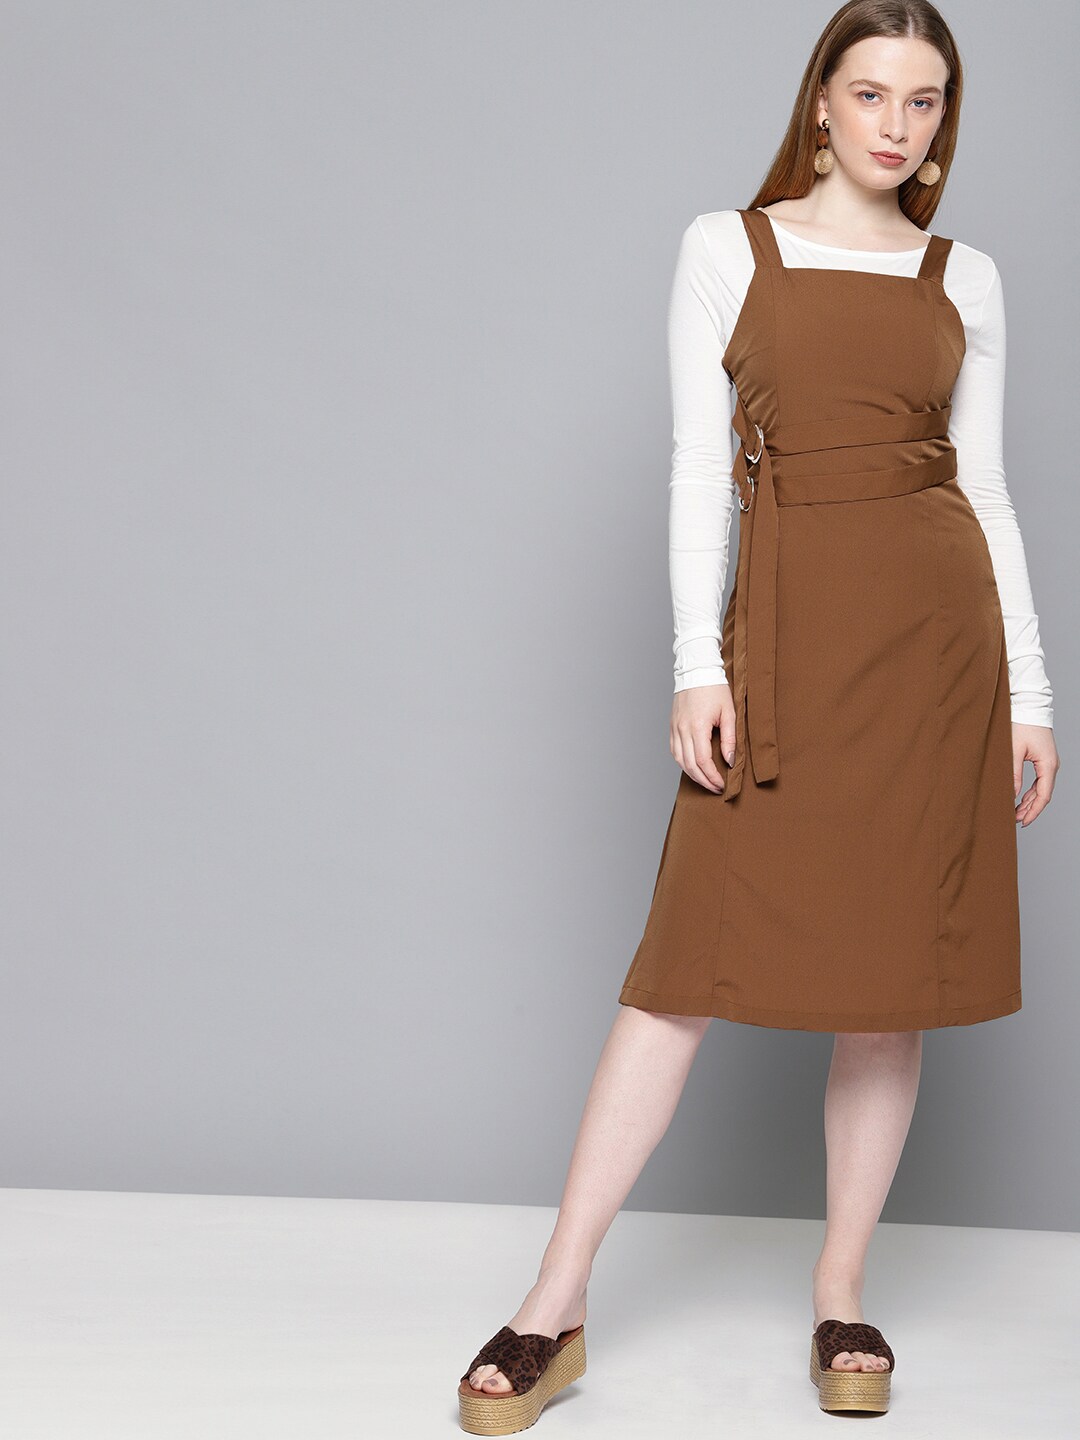 Tokyo Talkies Brown Satin Fit and Flare Dress Price in India